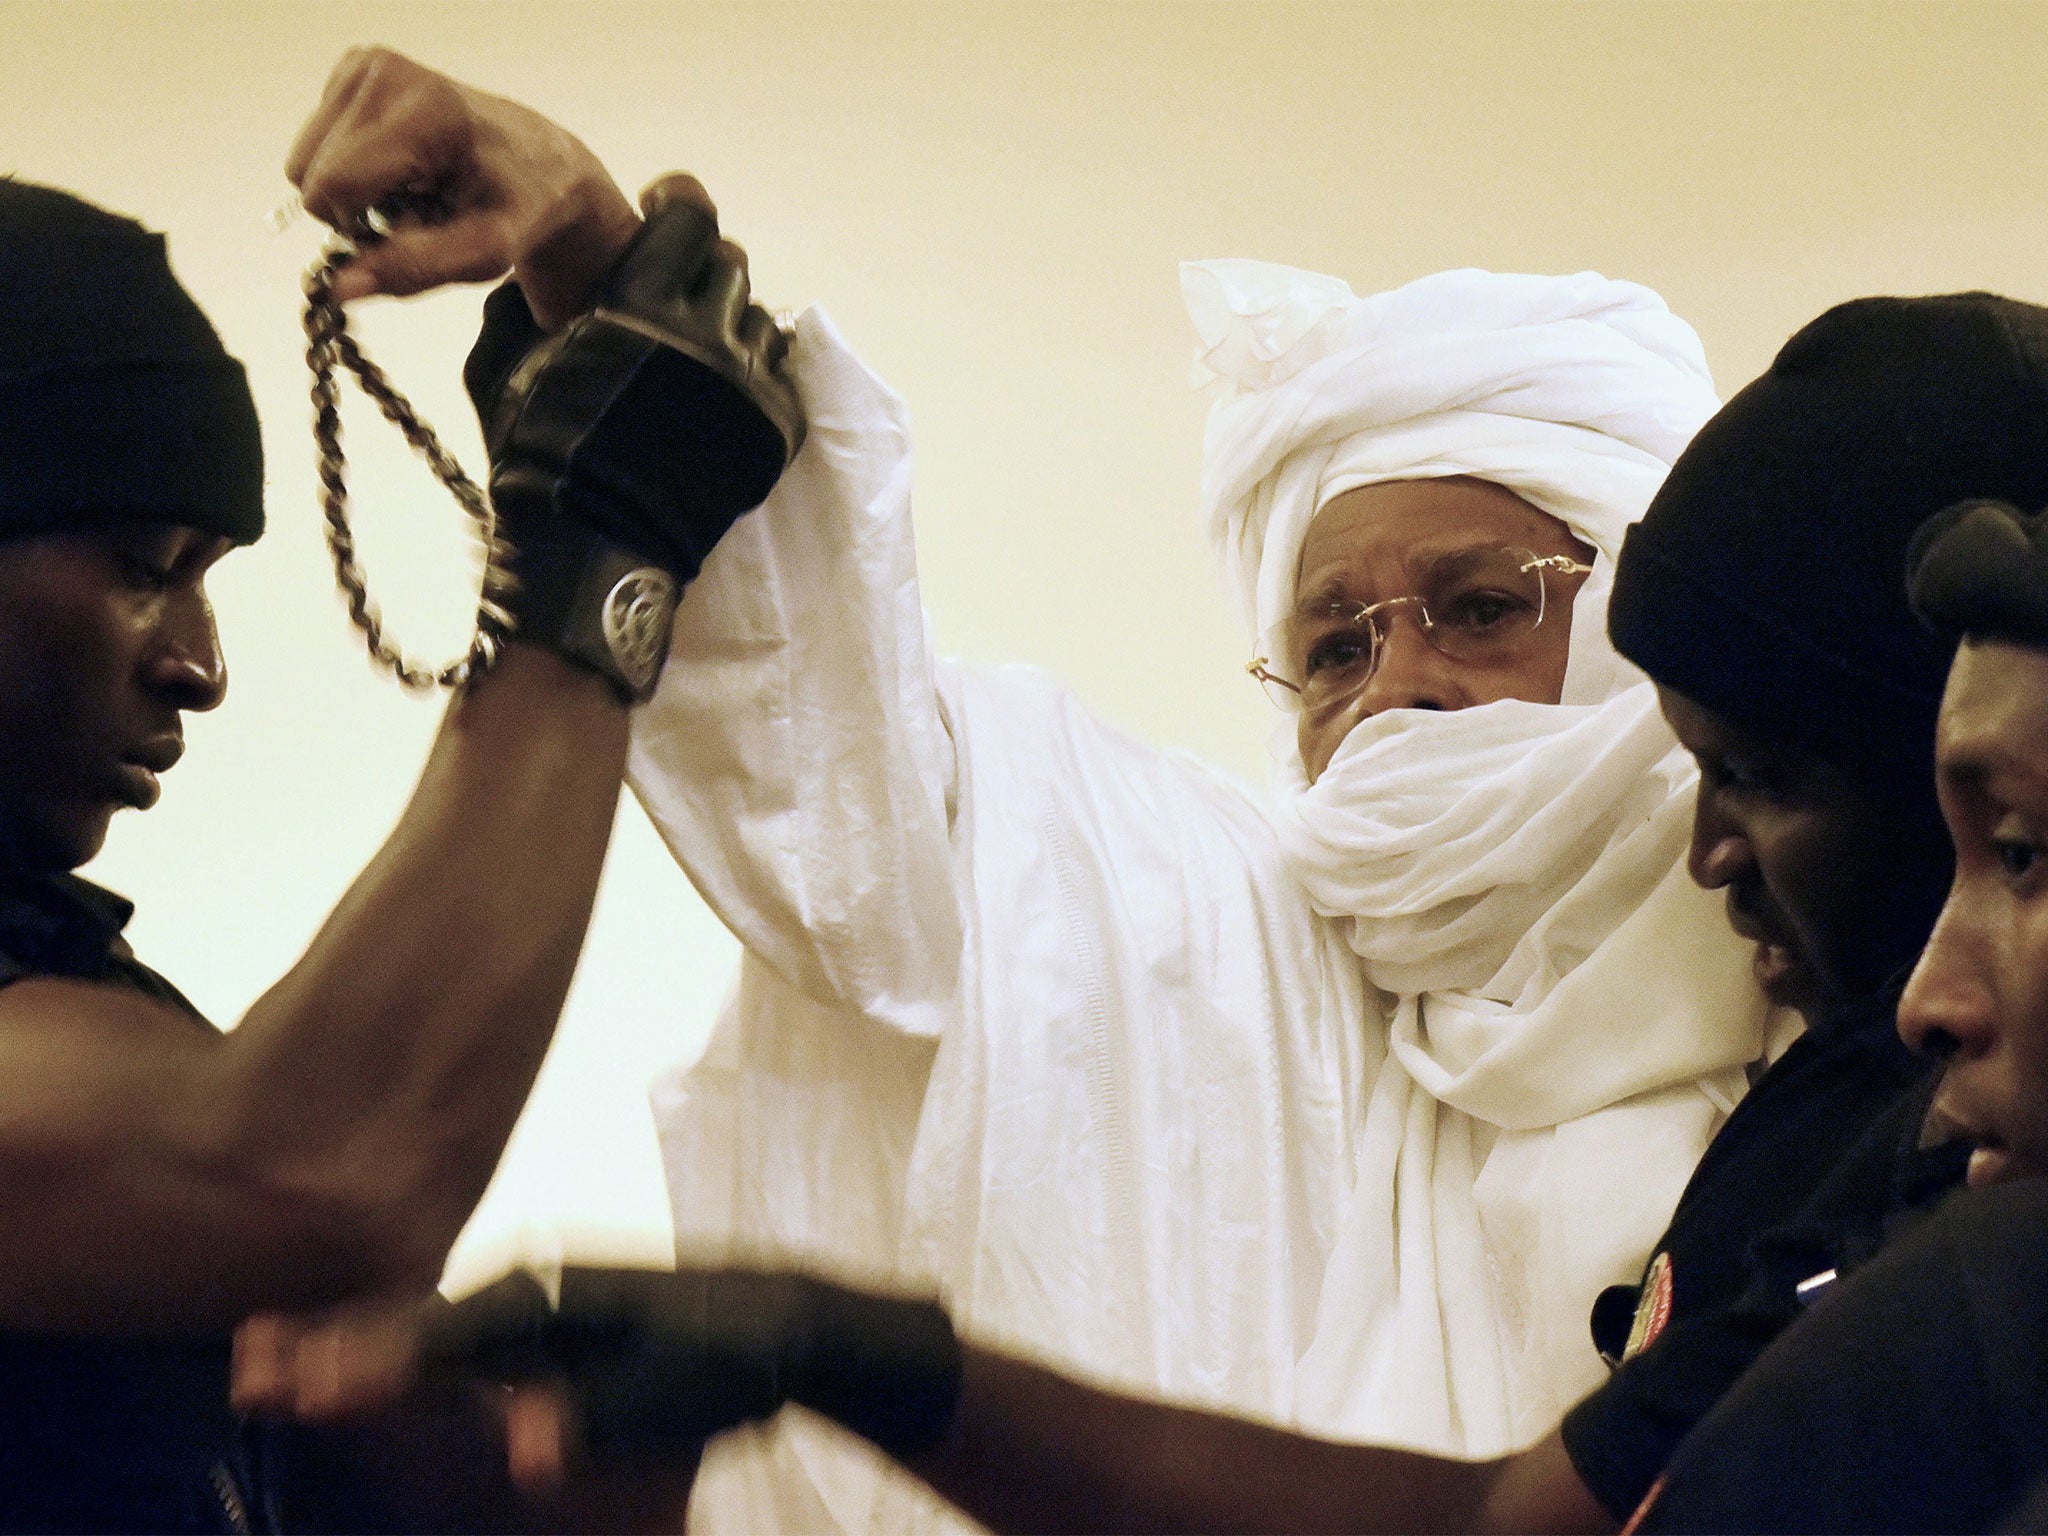 Former Chadian dictator Hissene Habre is escorted by prison guards into the courtroom for the first proceedings of his trial by the Extraordinary African Chambers in Dakar on July 20, 2015